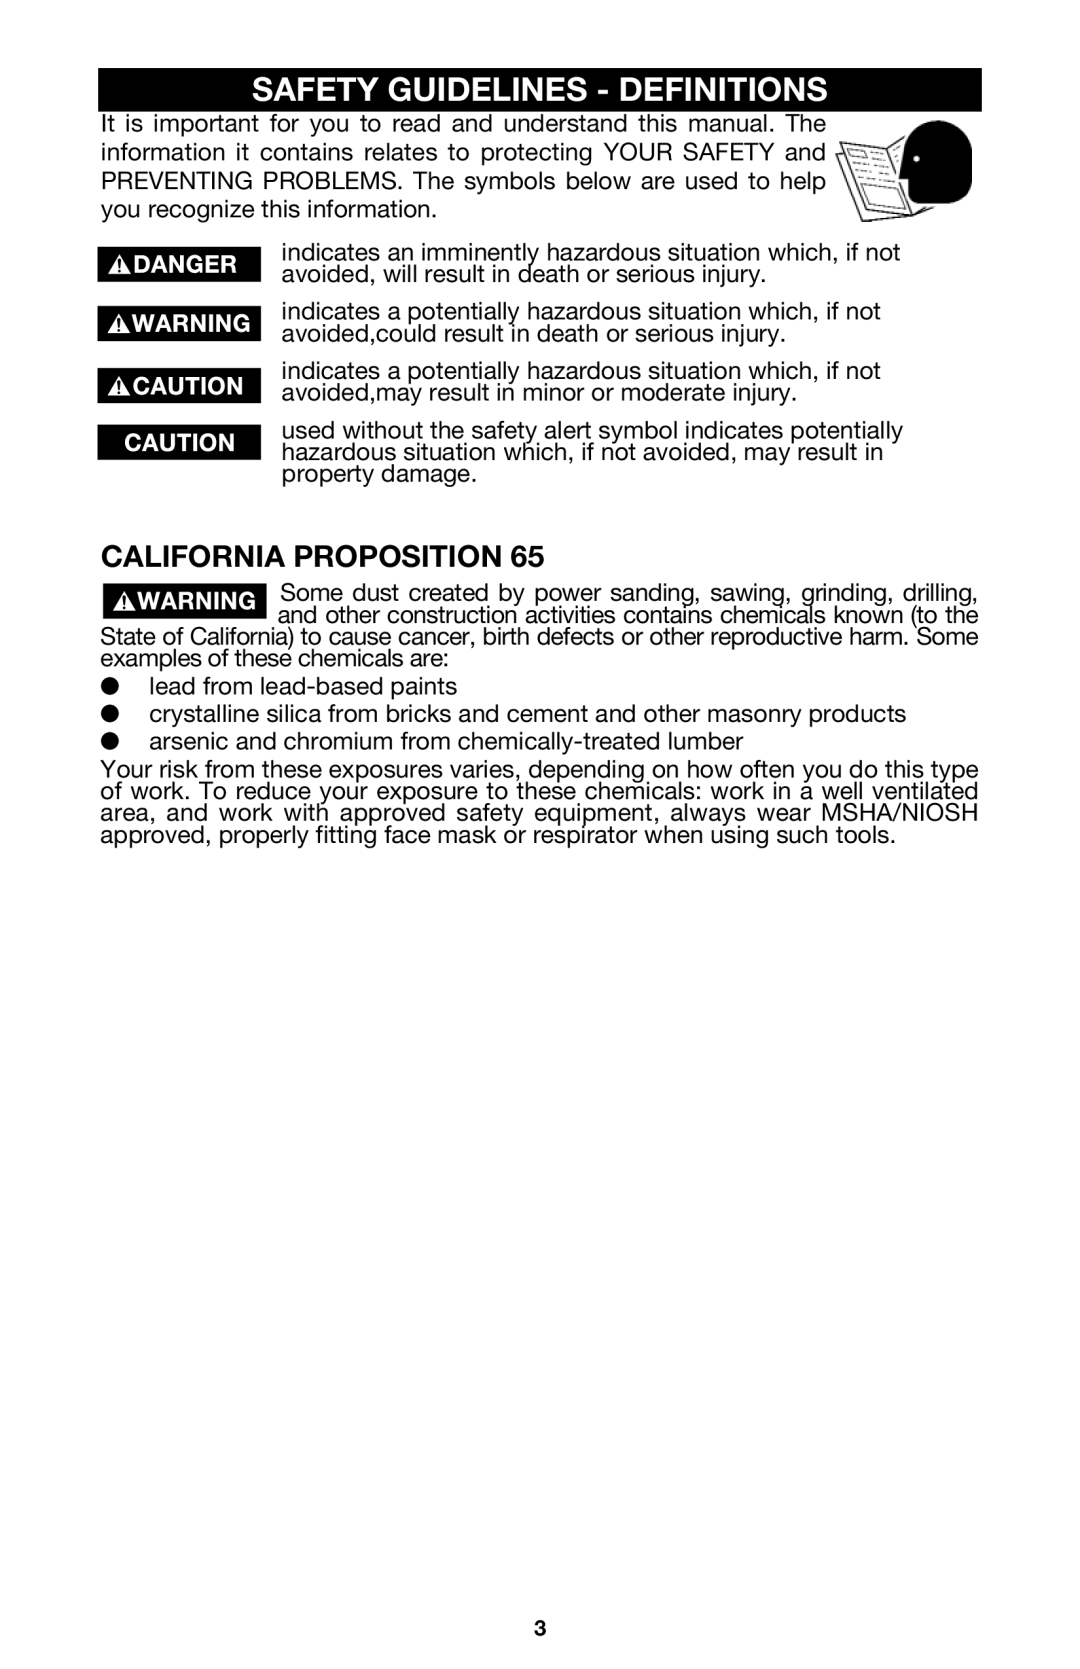 PYLE Audio 314 instruction manual Safety Guidelines - Definitions, California Proposition 